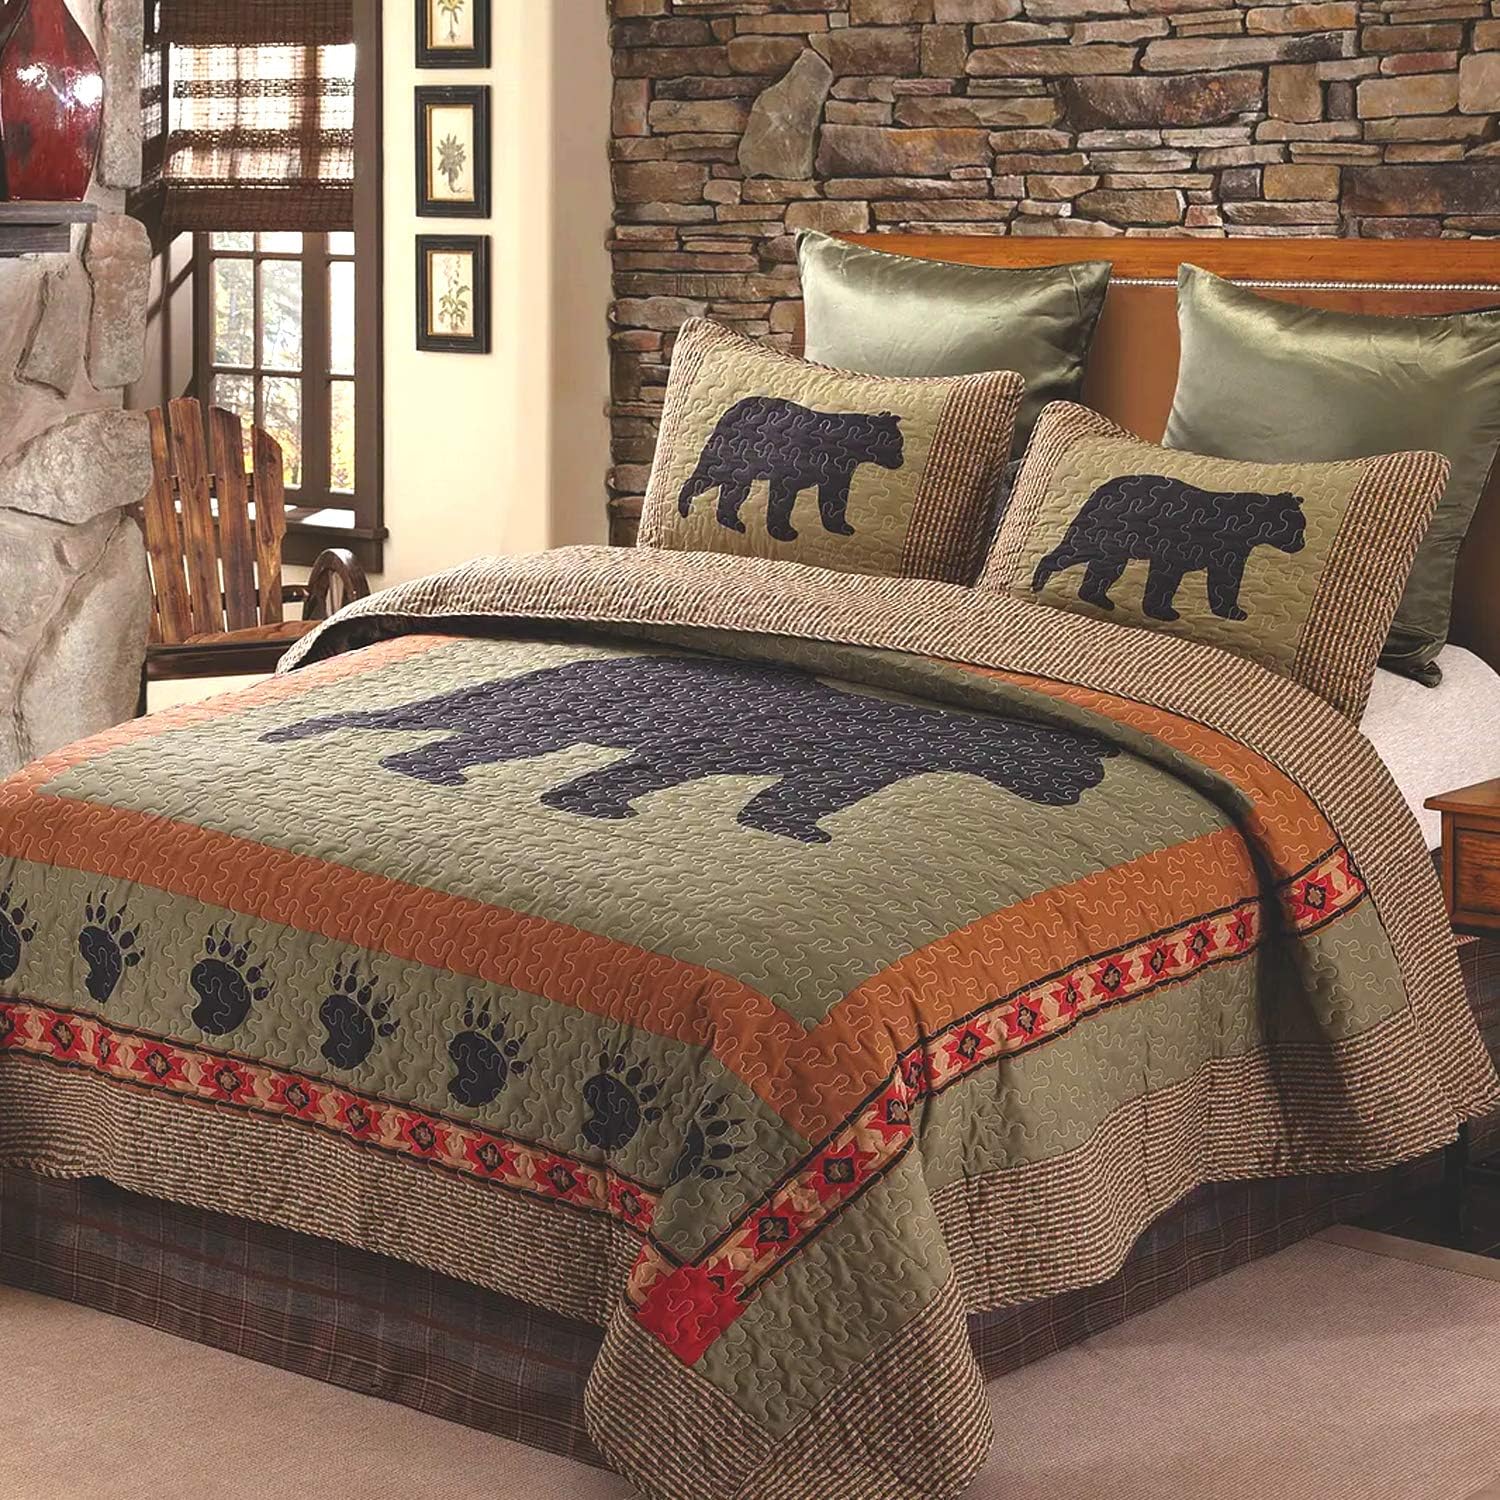 Virah Bella Quilt Collection - Bear & Paw Printed Bedding Set, 3-Piece King - Reversible Quilt with 2 Matching Pillow Shams